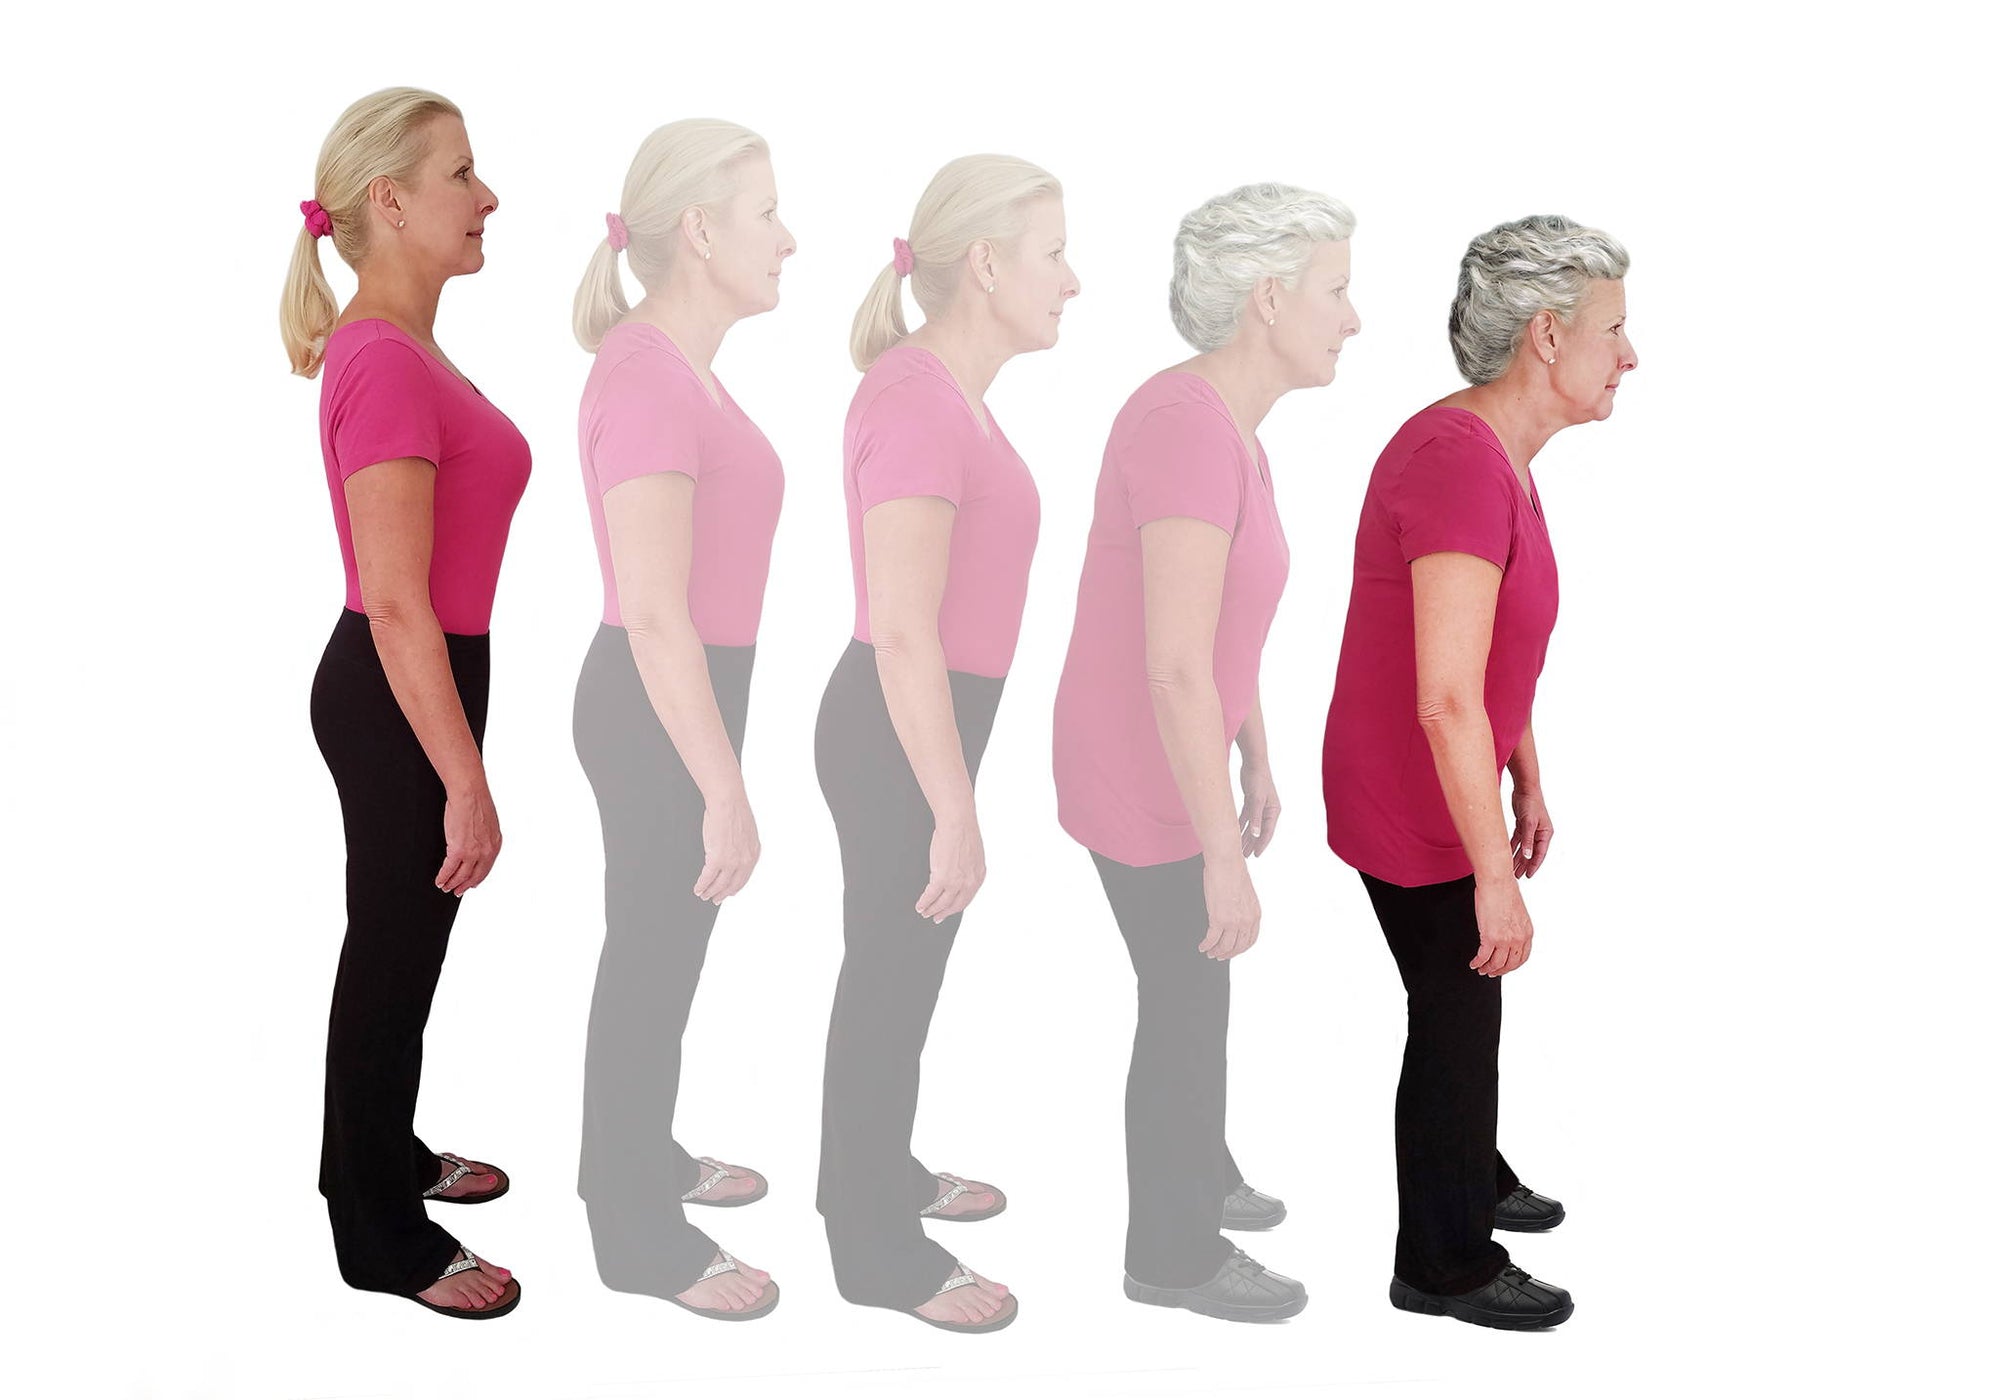 How To Prevent Shrinking From Poor Posture